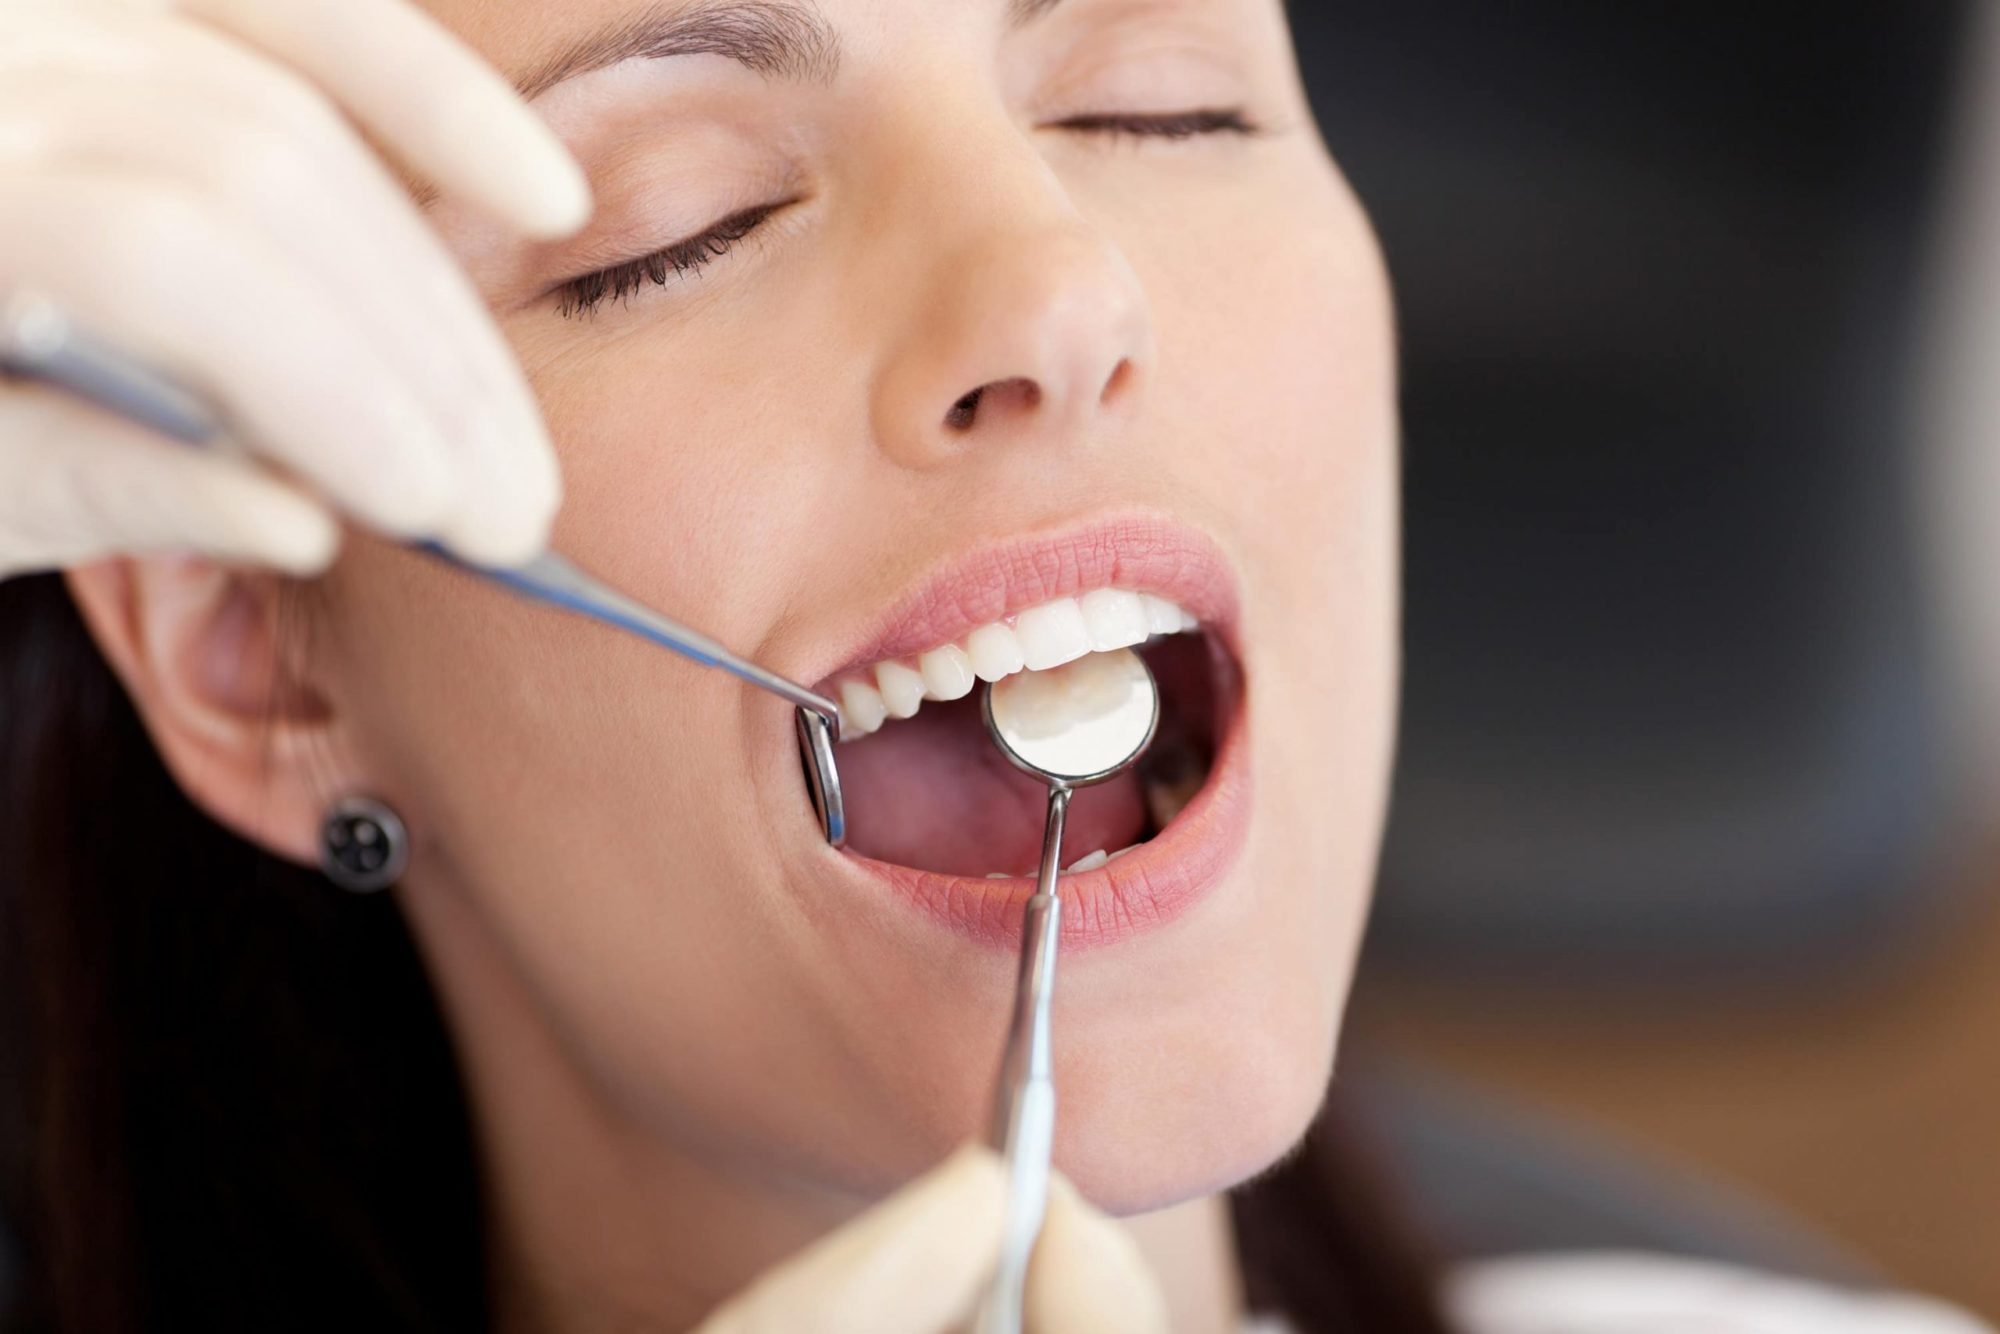 prepare for your wisdom teeth extraction as a patient